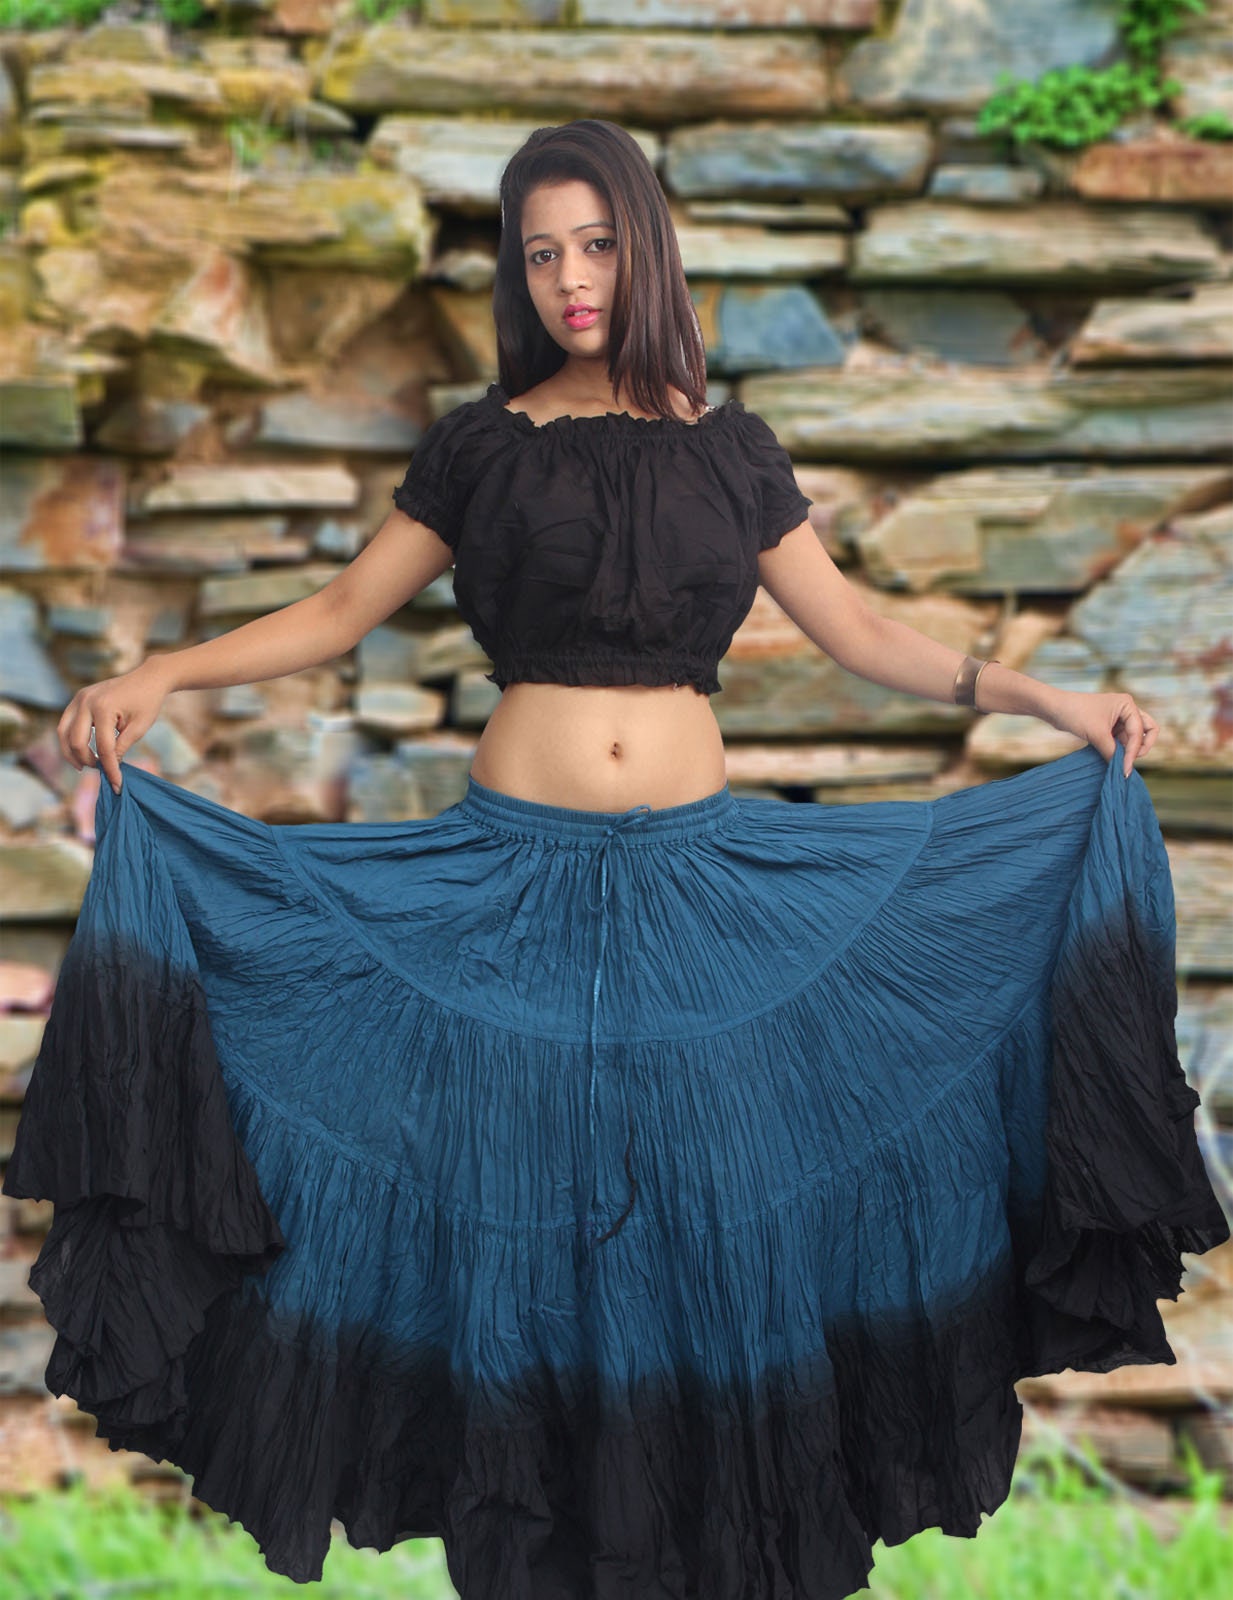 Cotton Gypsy Skirt 4 Tier 25 Yard Belly Dance available 30 Colors 